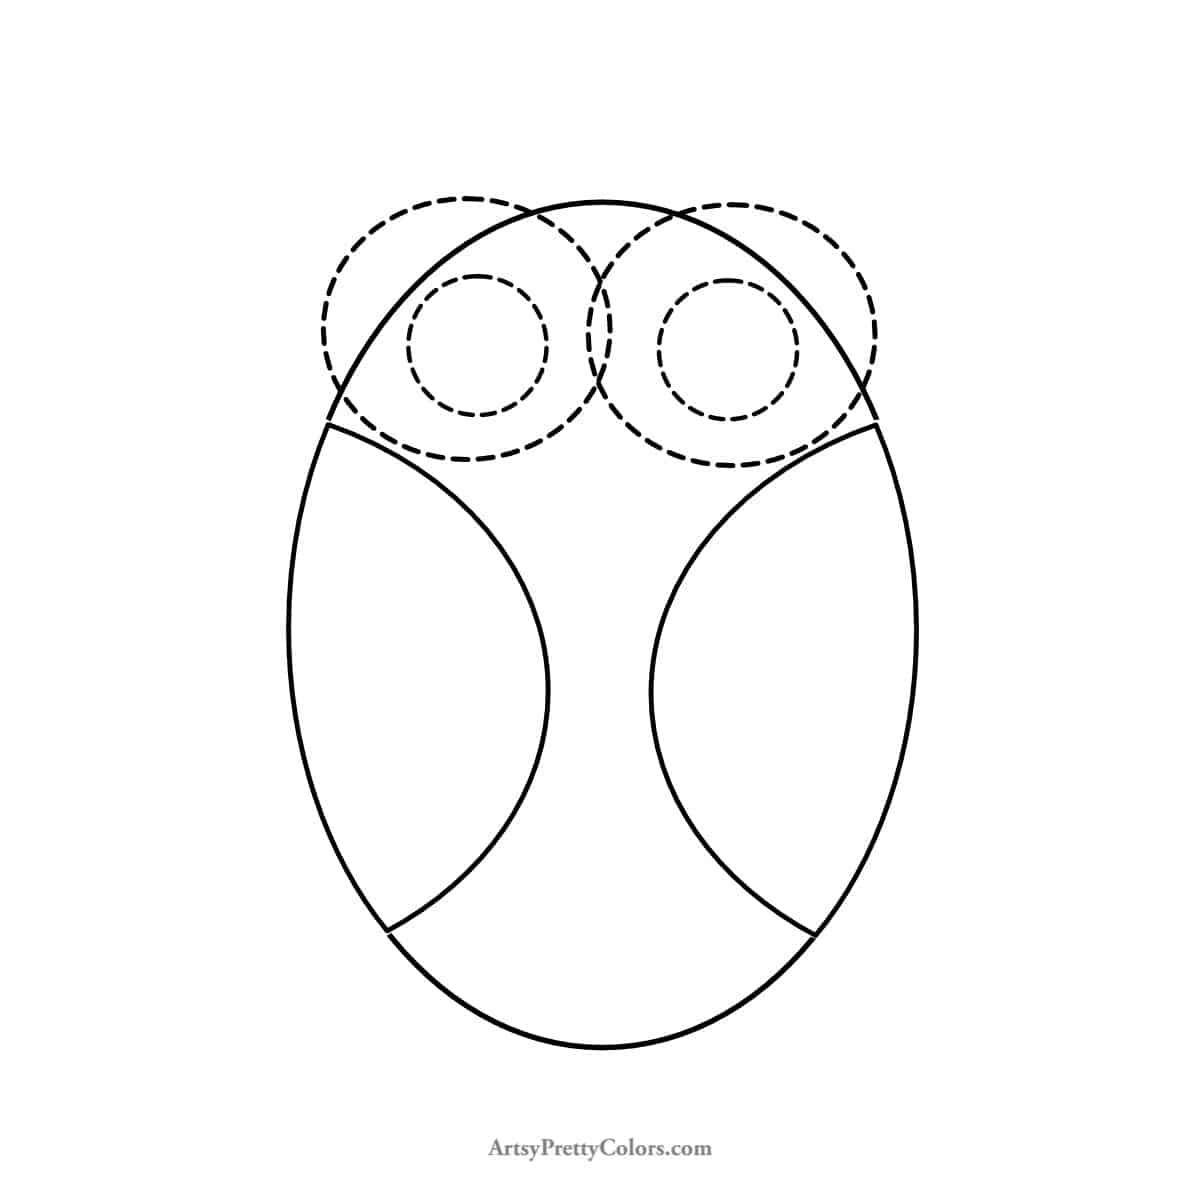 dotted circles on owl for next step